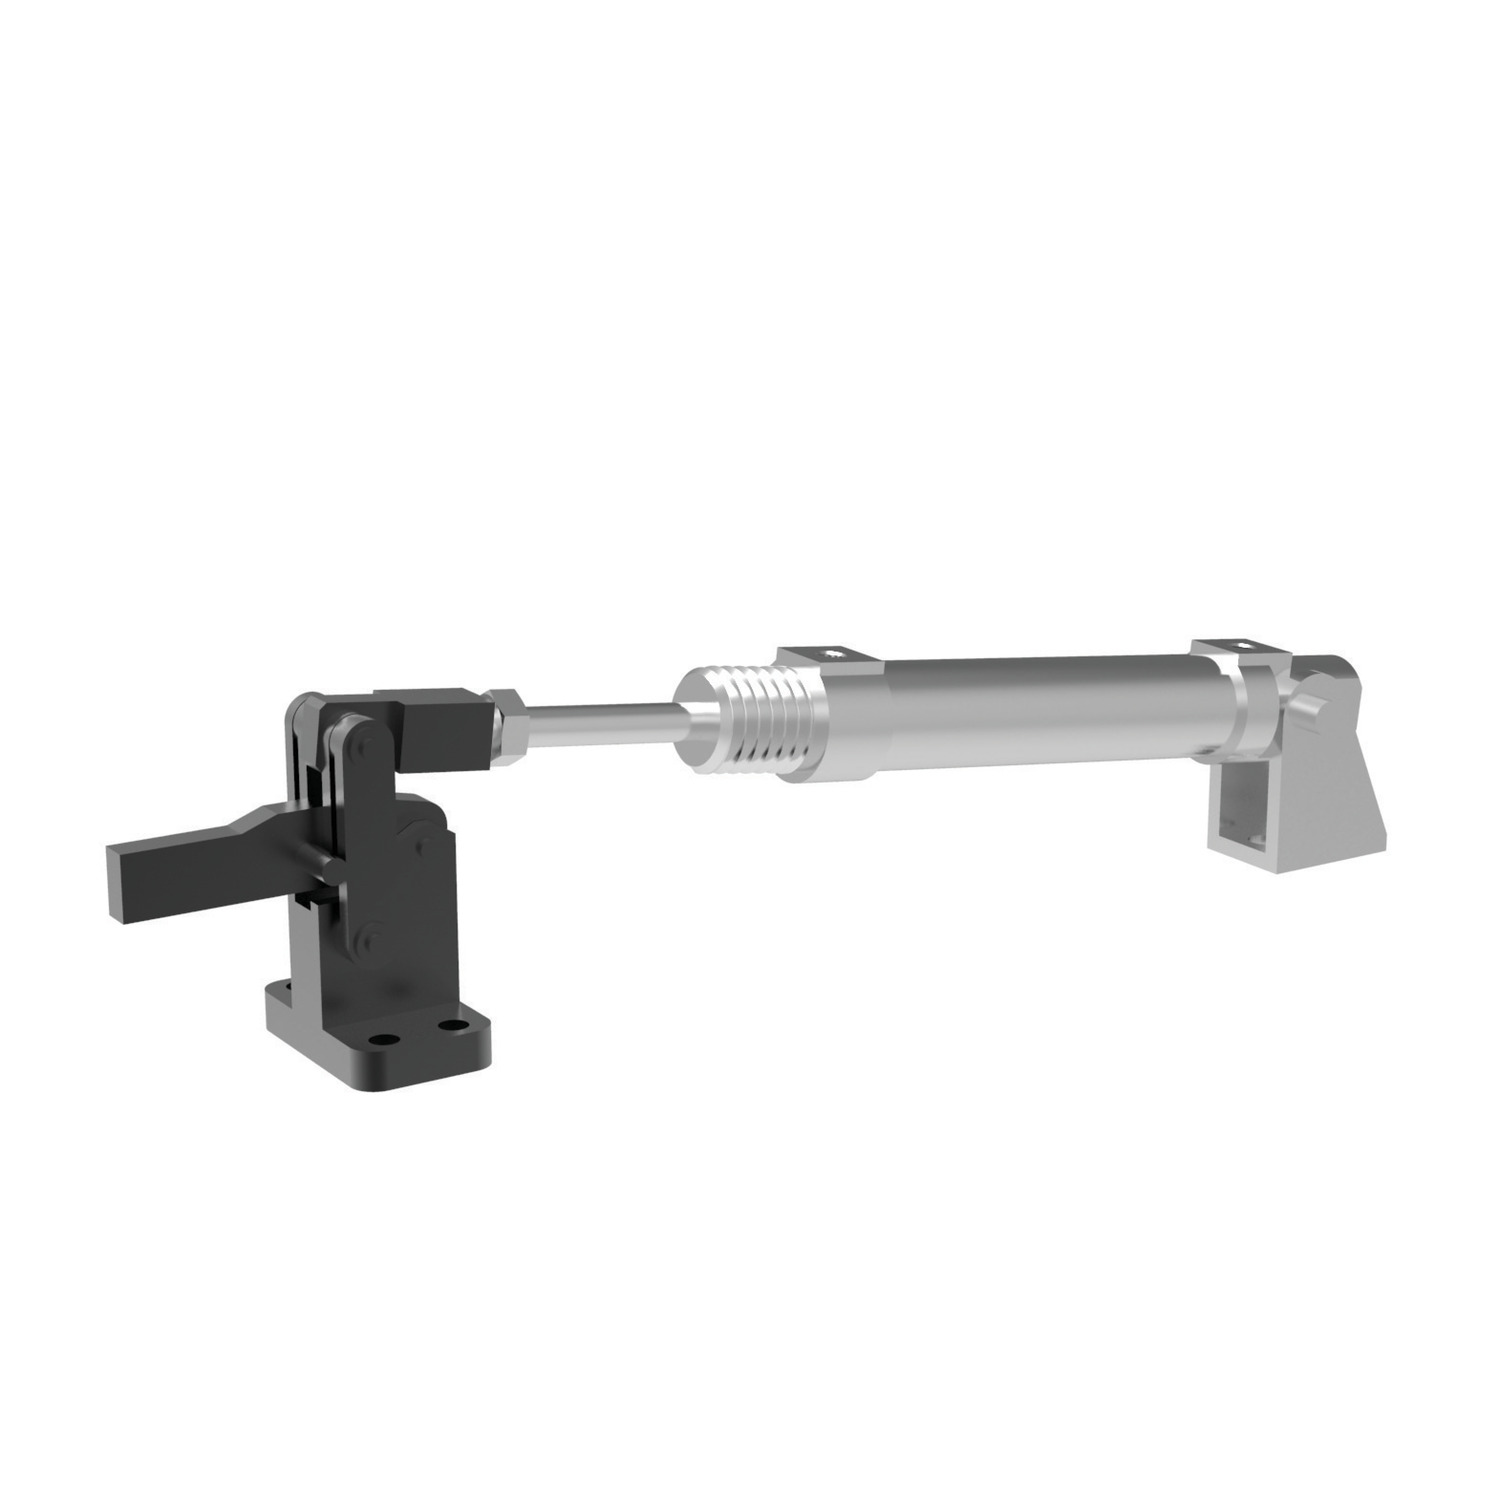 47480 - Pneumatic Toggle Clamps